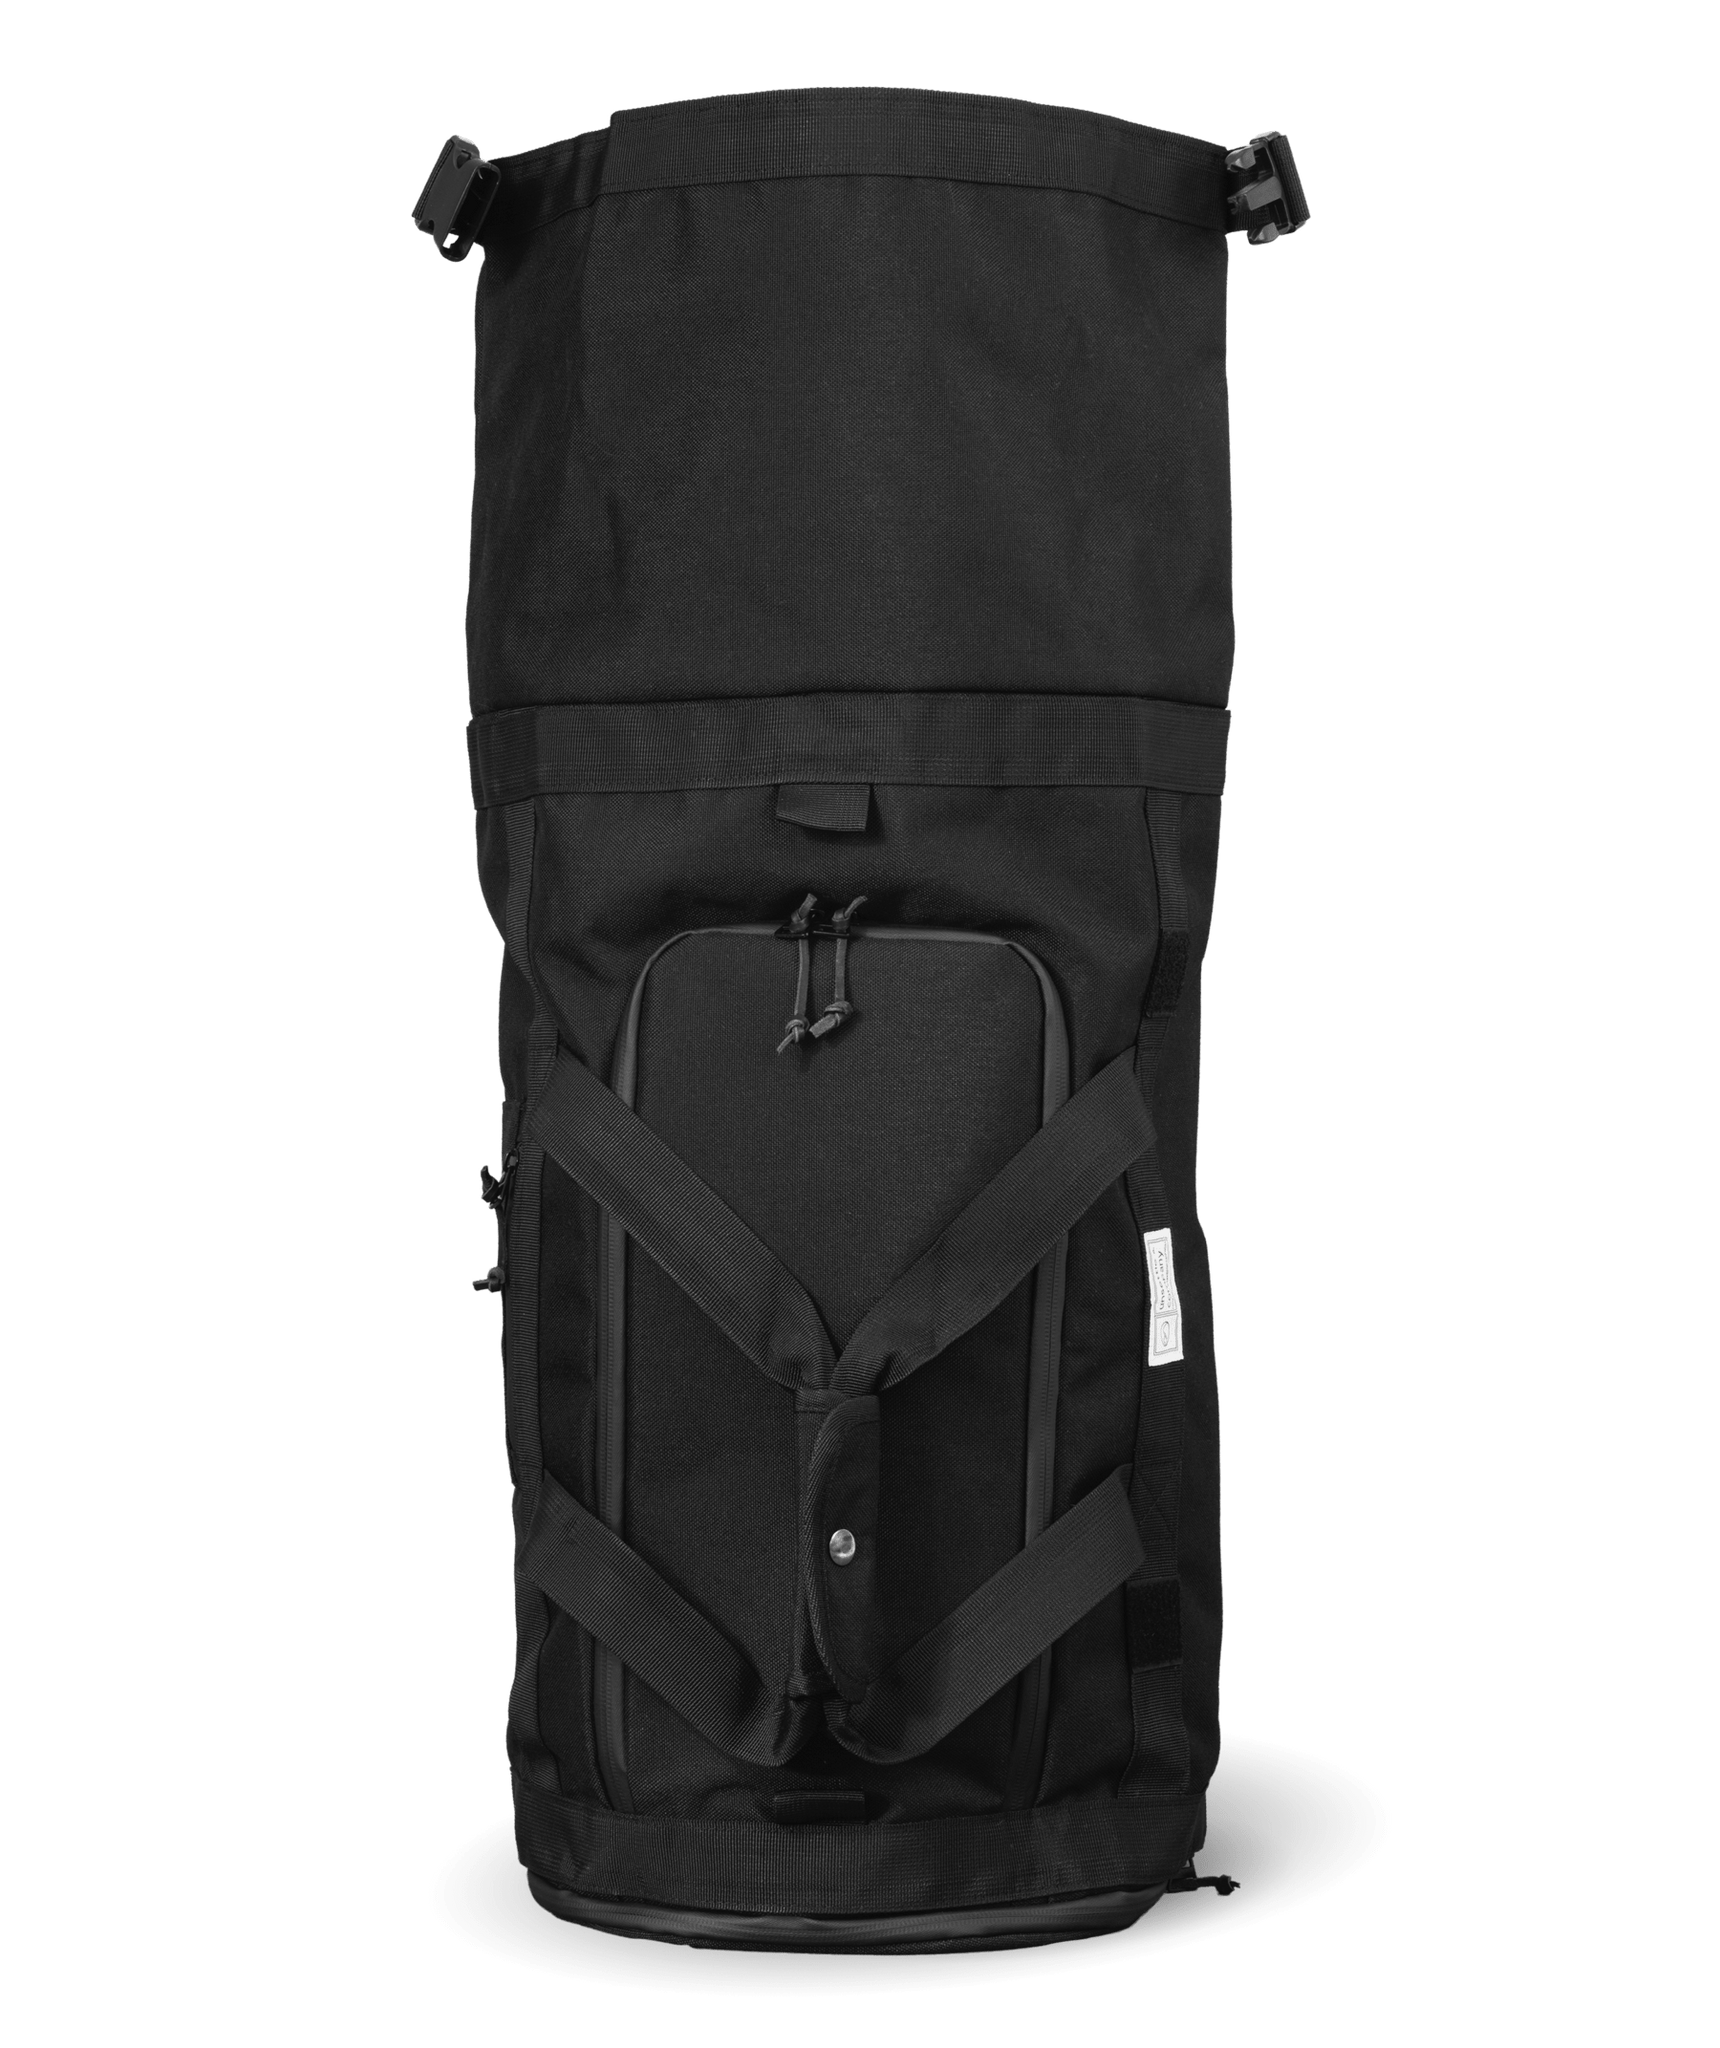 Black Tumbled Leather 2 Bag Set (Commuter Backpack and Duffle)